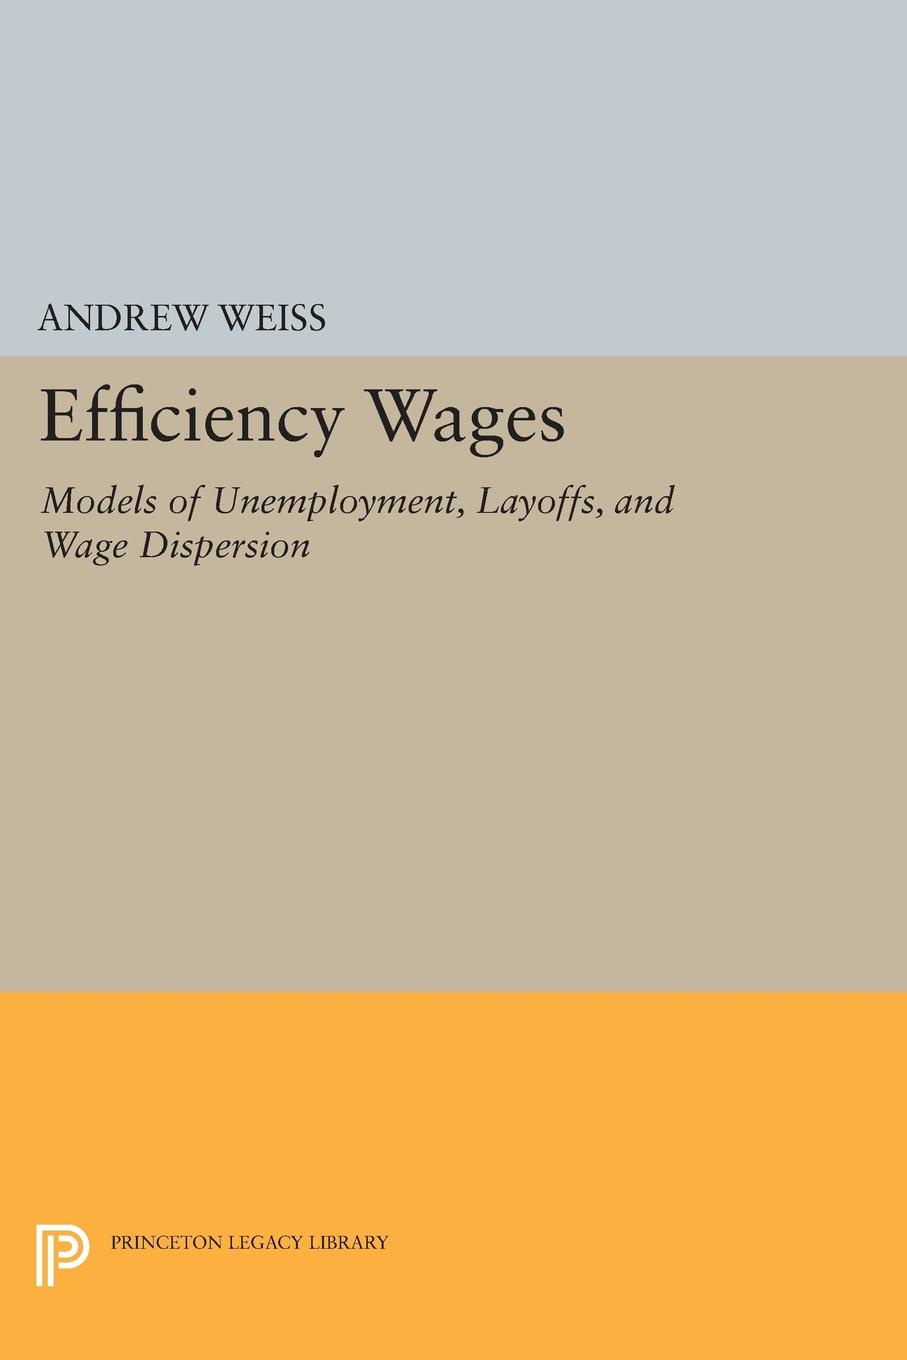 Efficiency Wages. Models of Unemployment, Layoffs, and Wage Dispersion